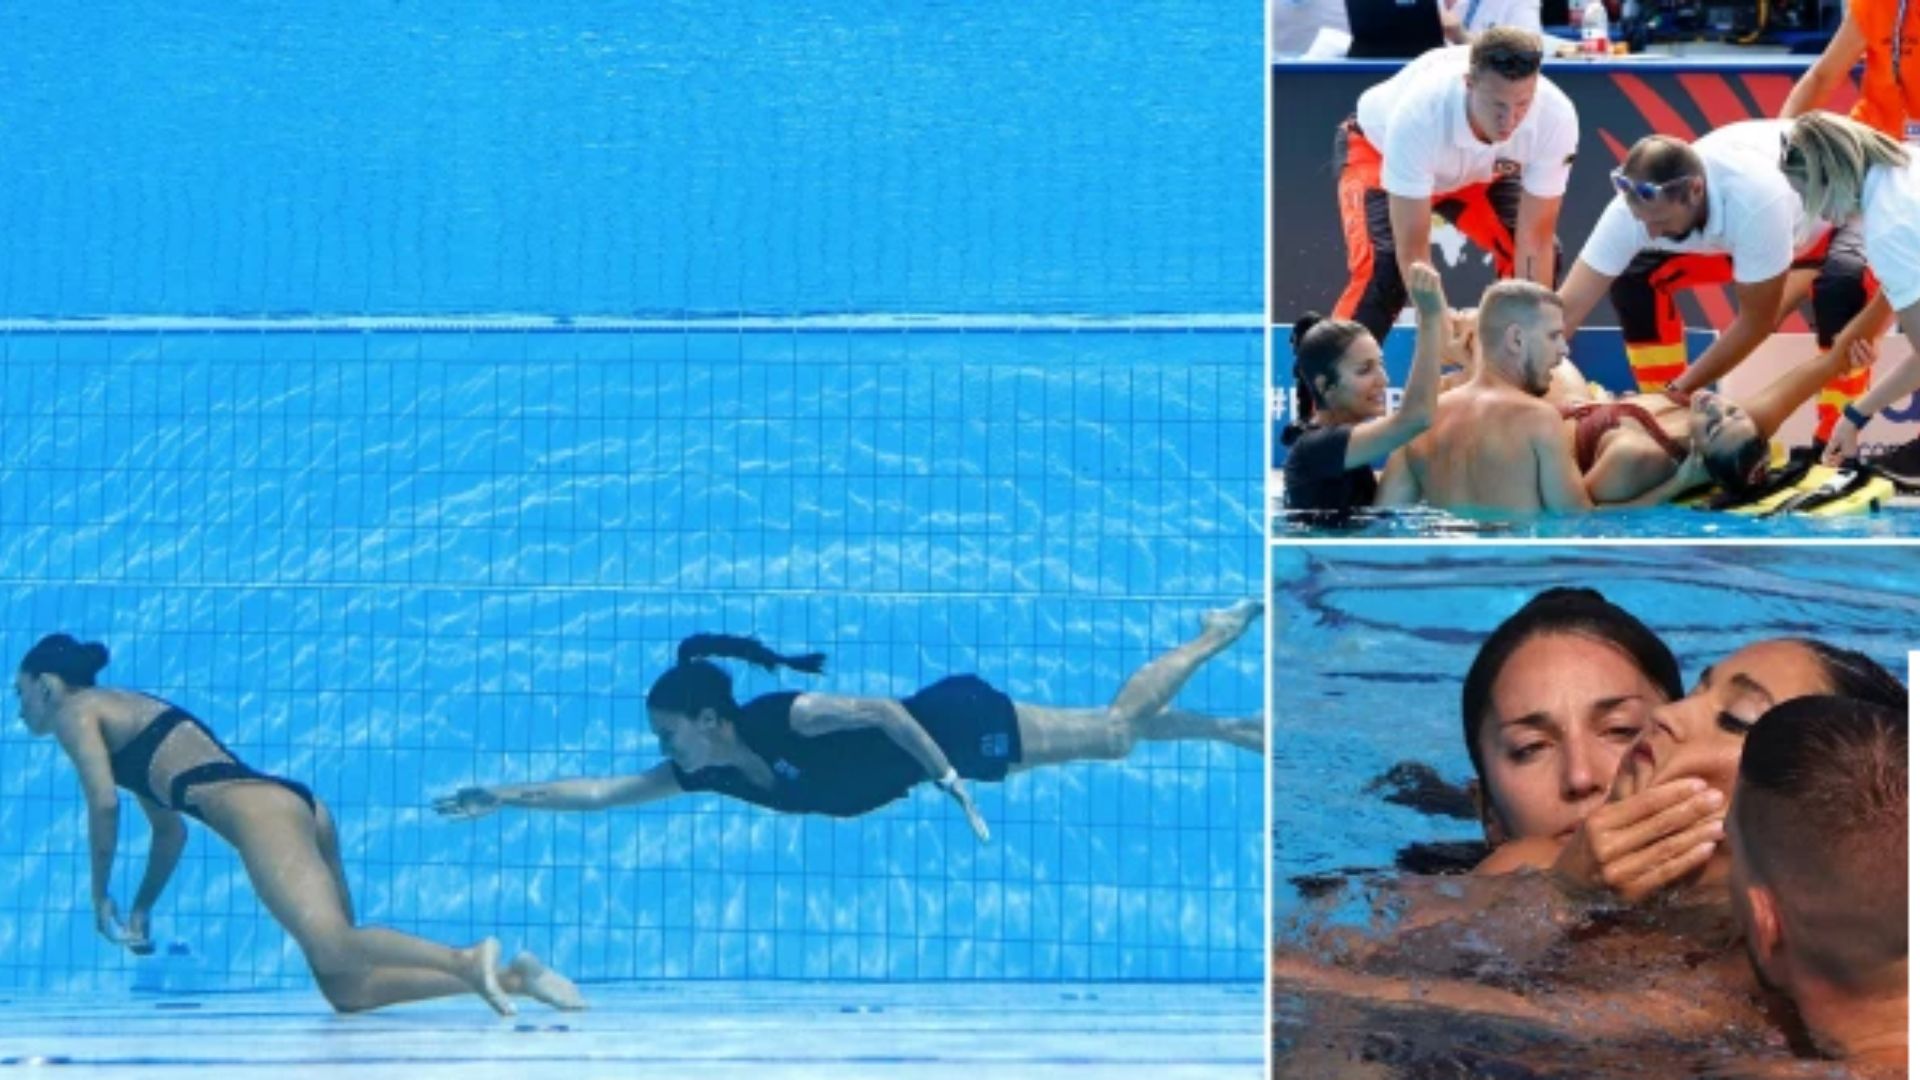 Coach jumps into the pool to save the swimmers life after she blacked out